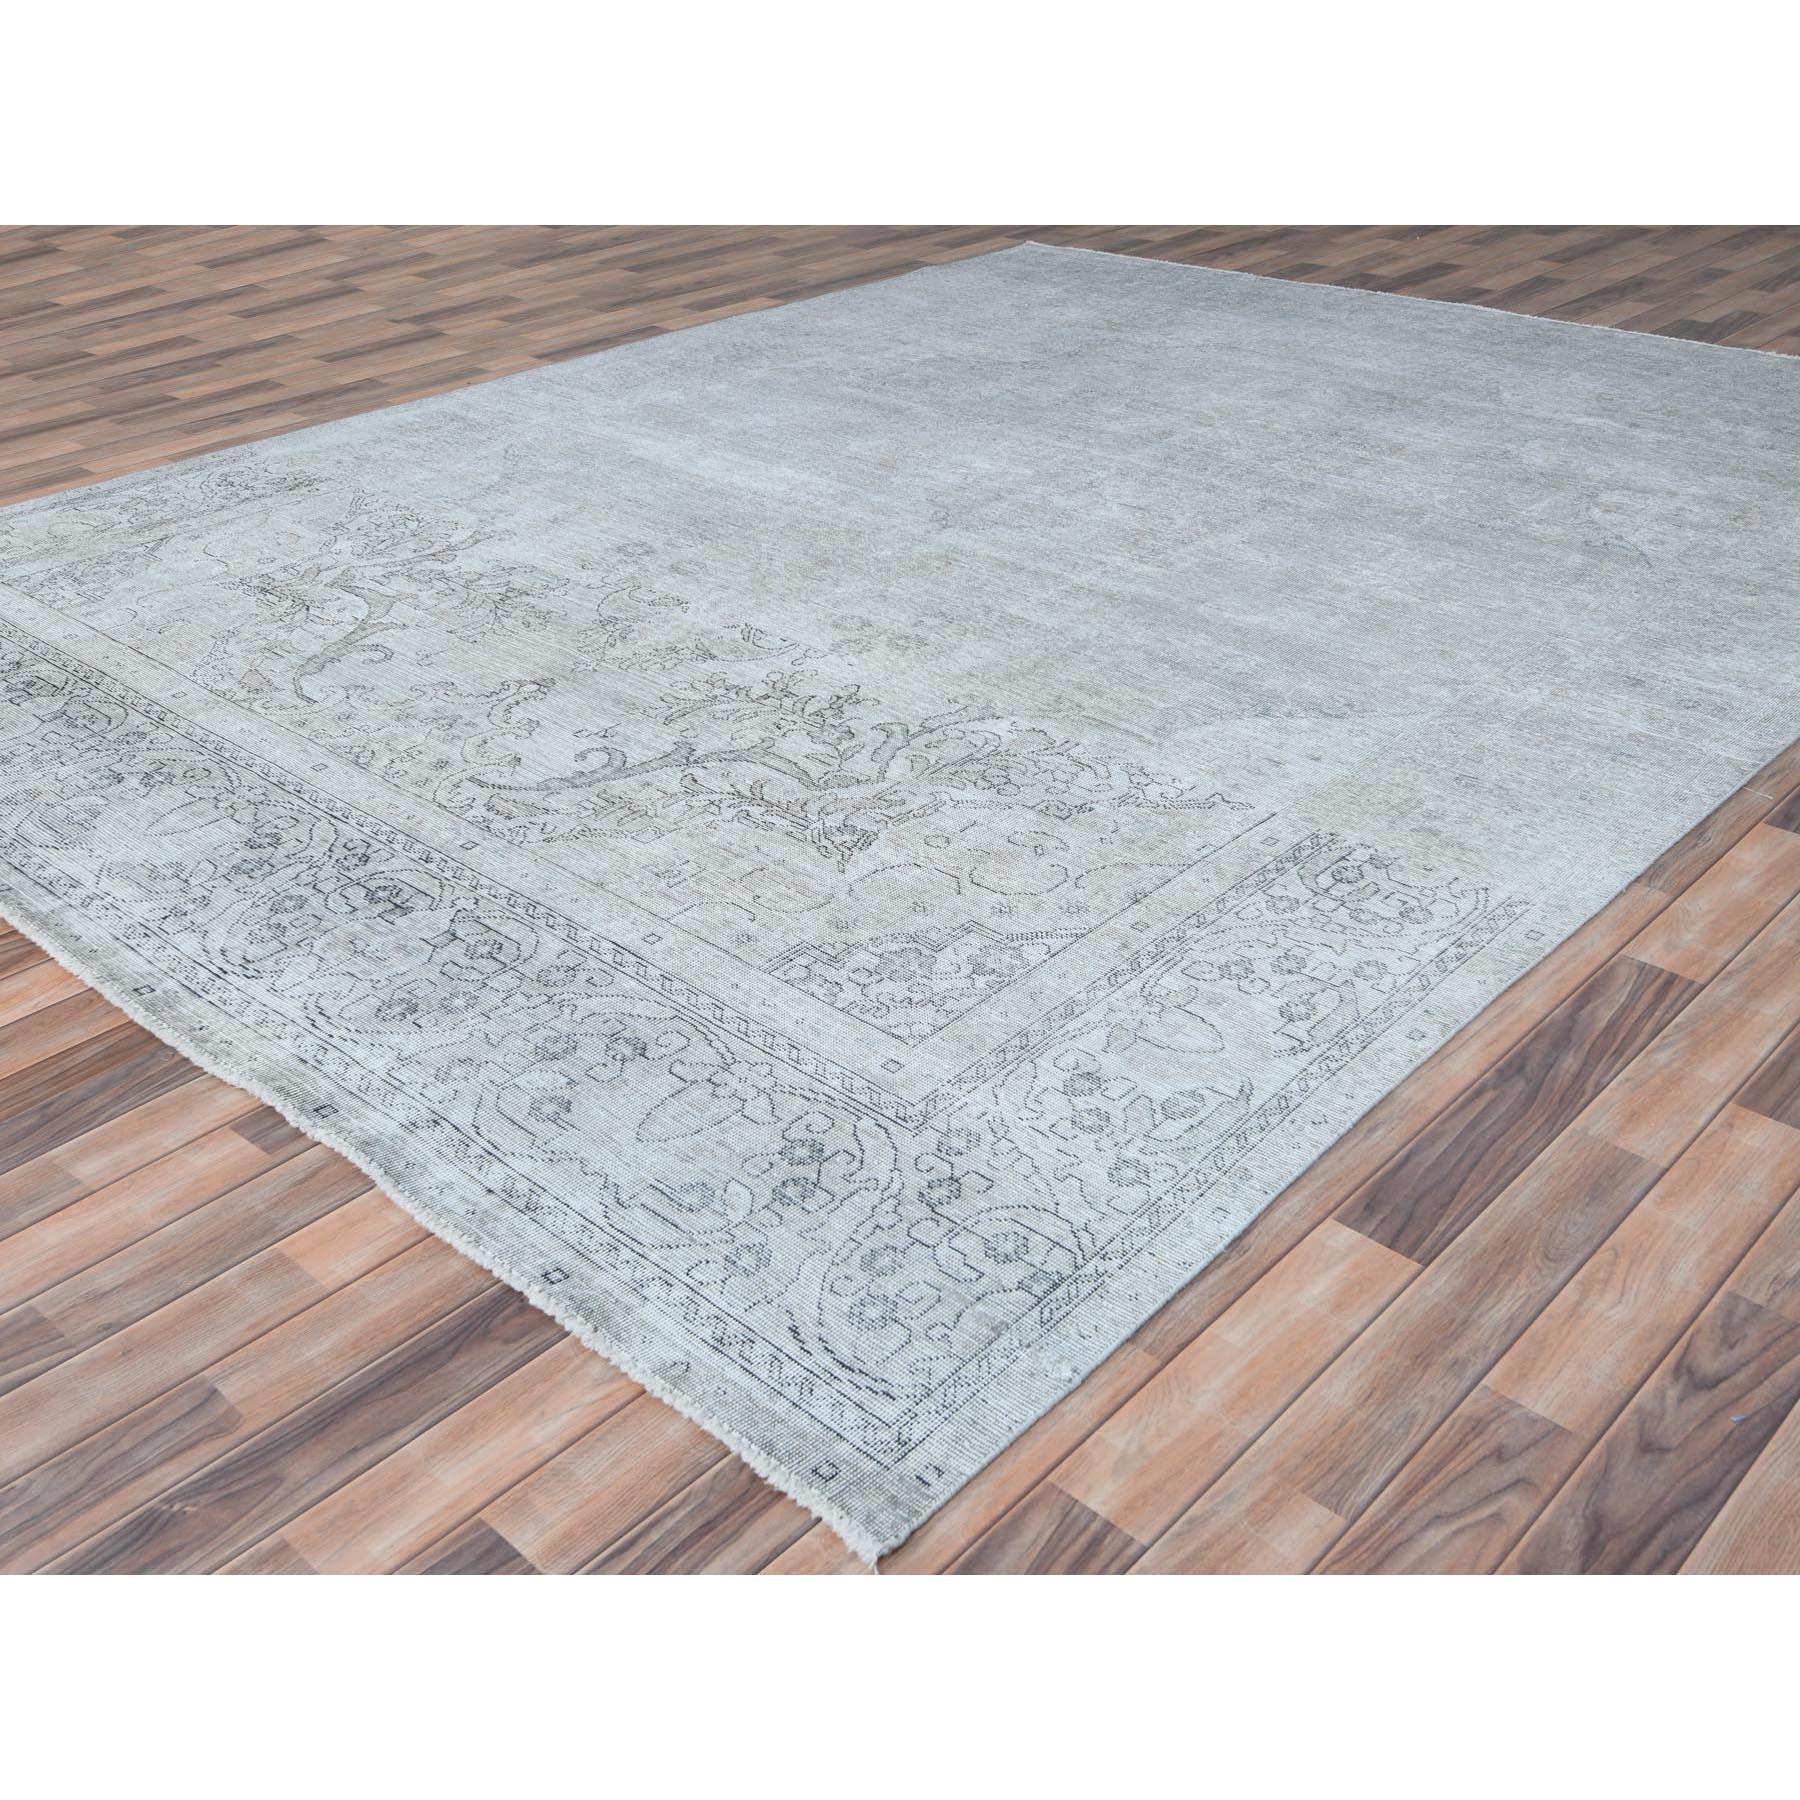 Washed Out Gray Vintage Persian Tabriz, Hand Knotted Worn Wool Distressed Rug In Good Condition For Sale In Carlstadt, NJ